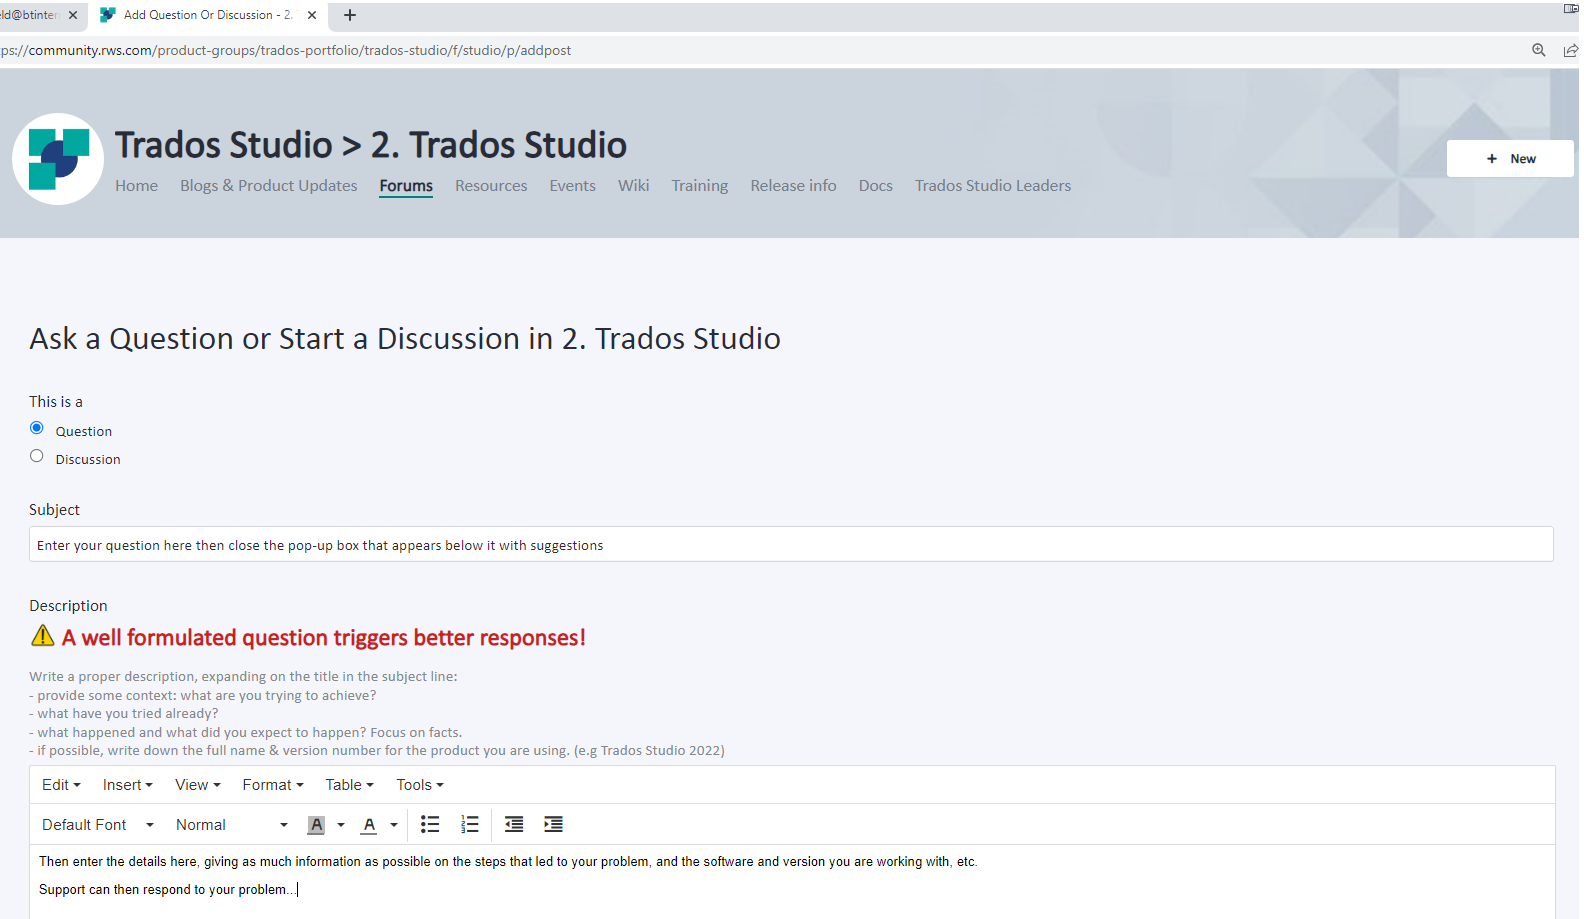 Trados Studio forum page with a message prompt stating 'A well formulated question triggers better responses!' and fields for 'Subject' and 'Description' of the new thread.